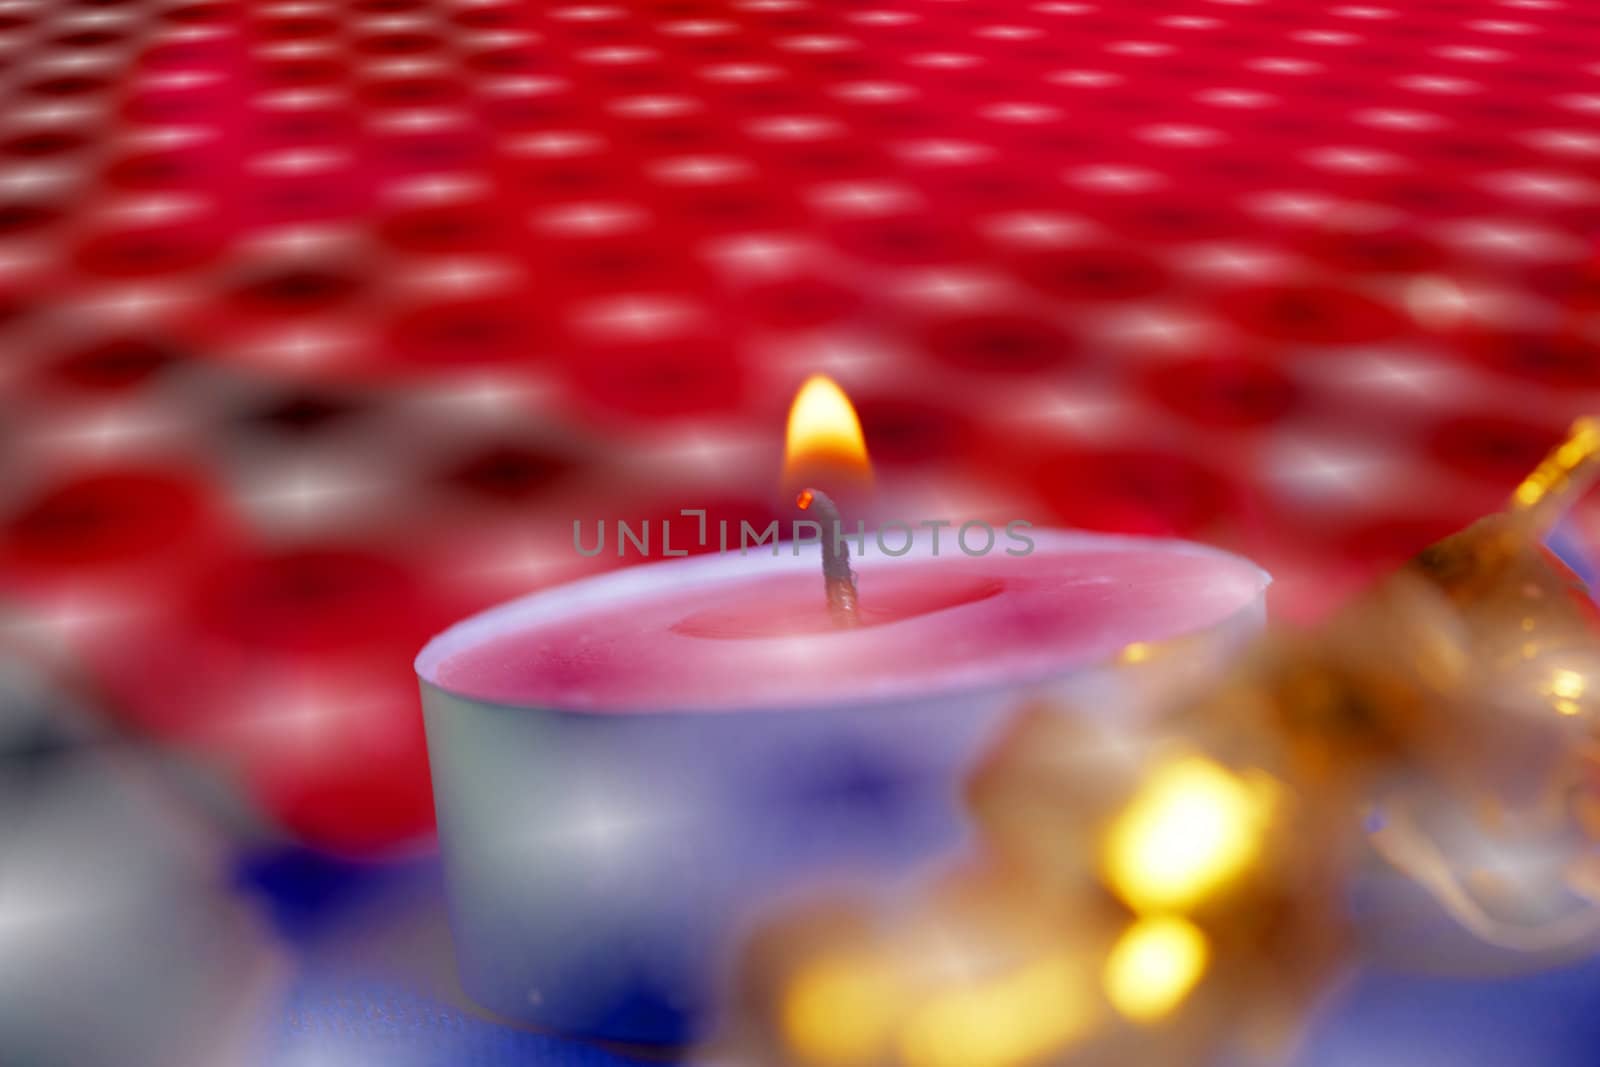 Burning candle and red flowers on a table